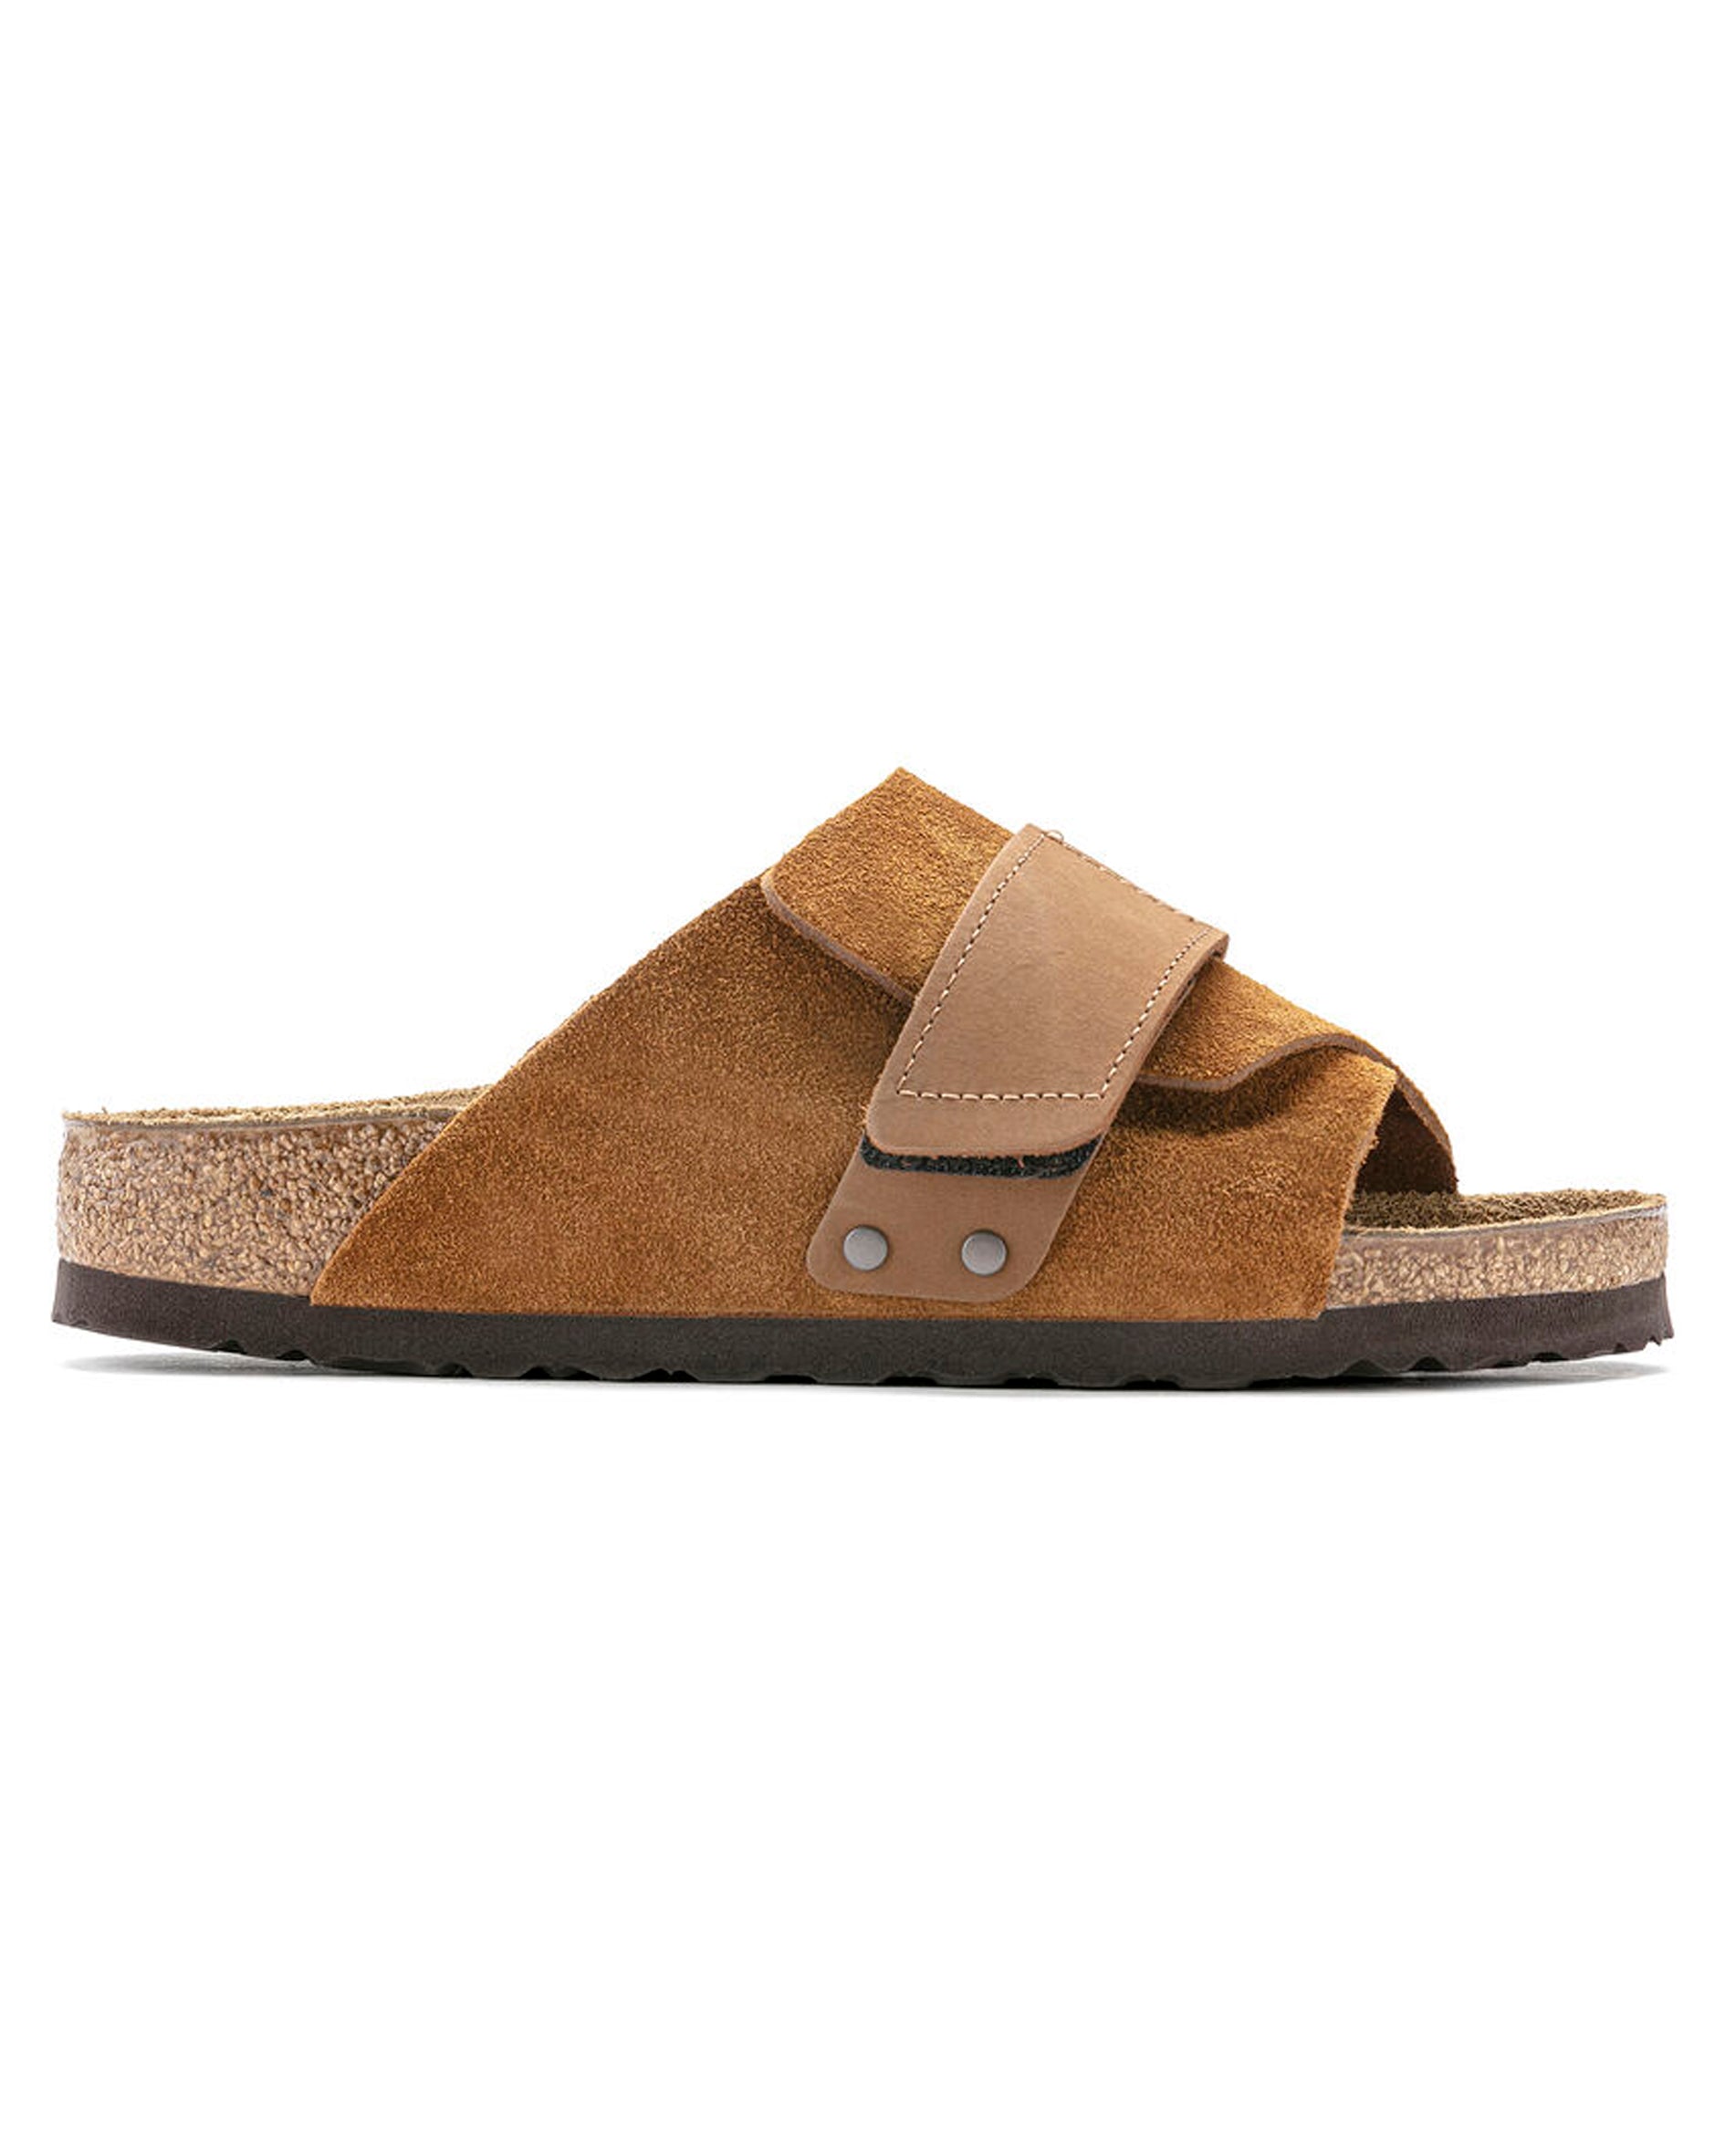 Kyoto Mink Suede Leather Sandals